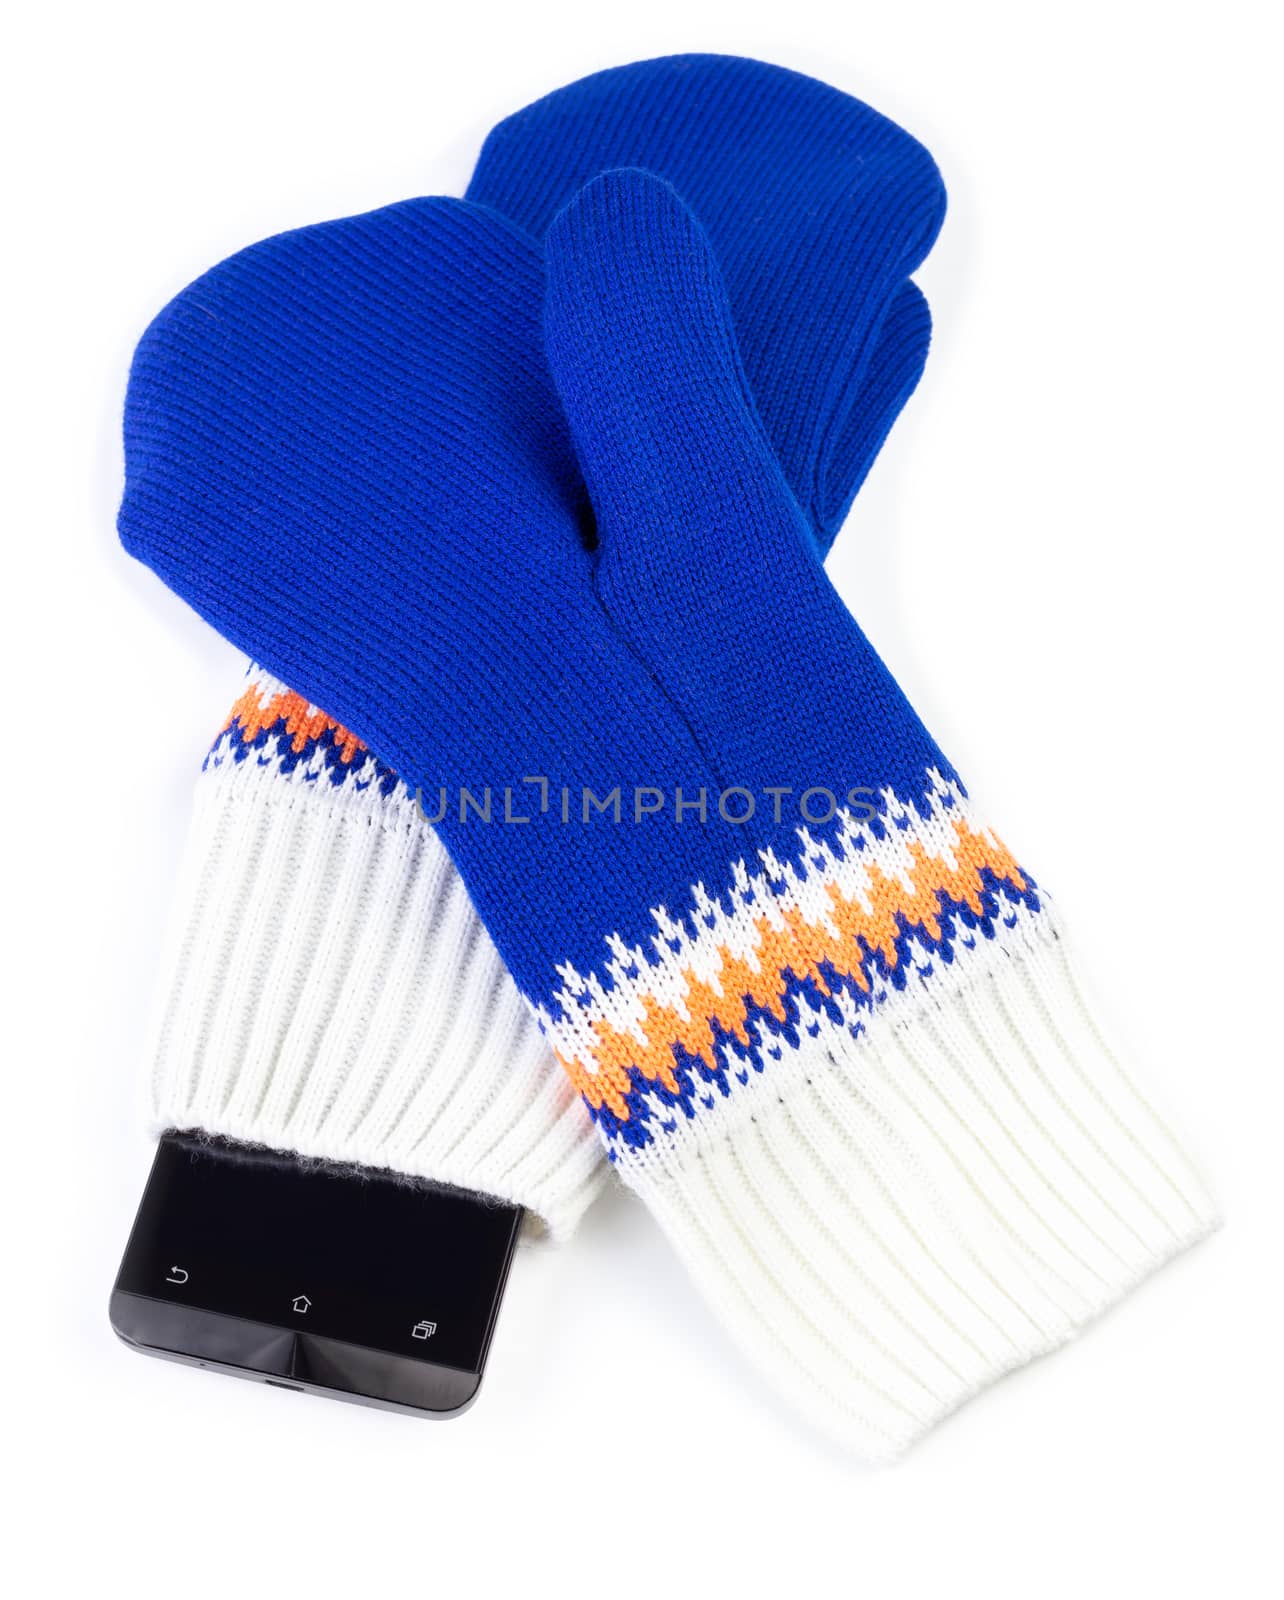 blue and white knited mittens with cellphone isolated on white background by z1b